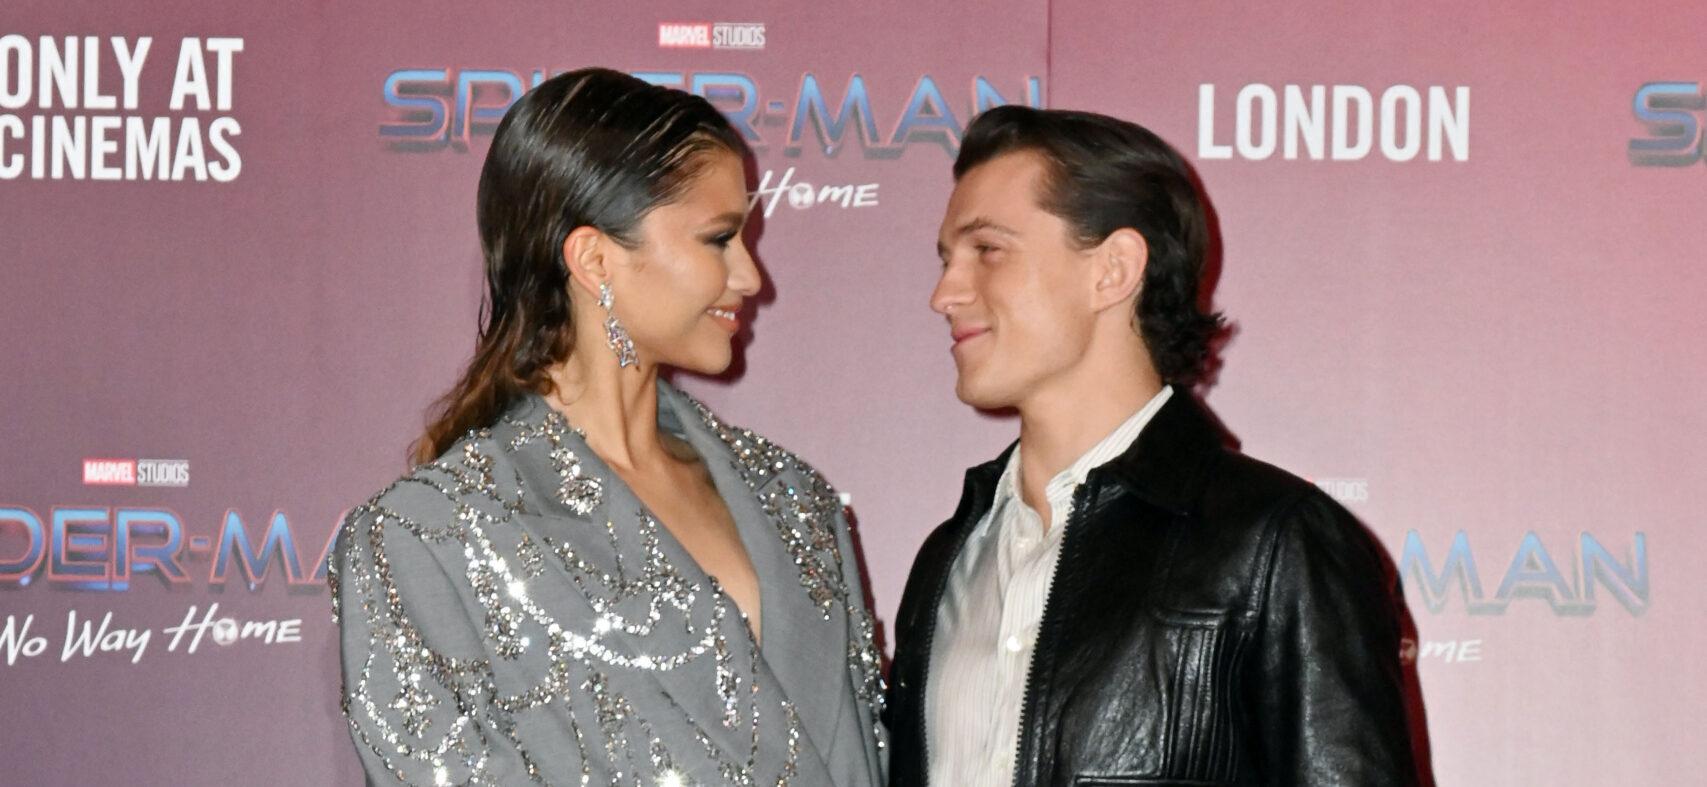 Here’s Why Zendaya Keeps Her Relationship With Tom Holland Under Wraps